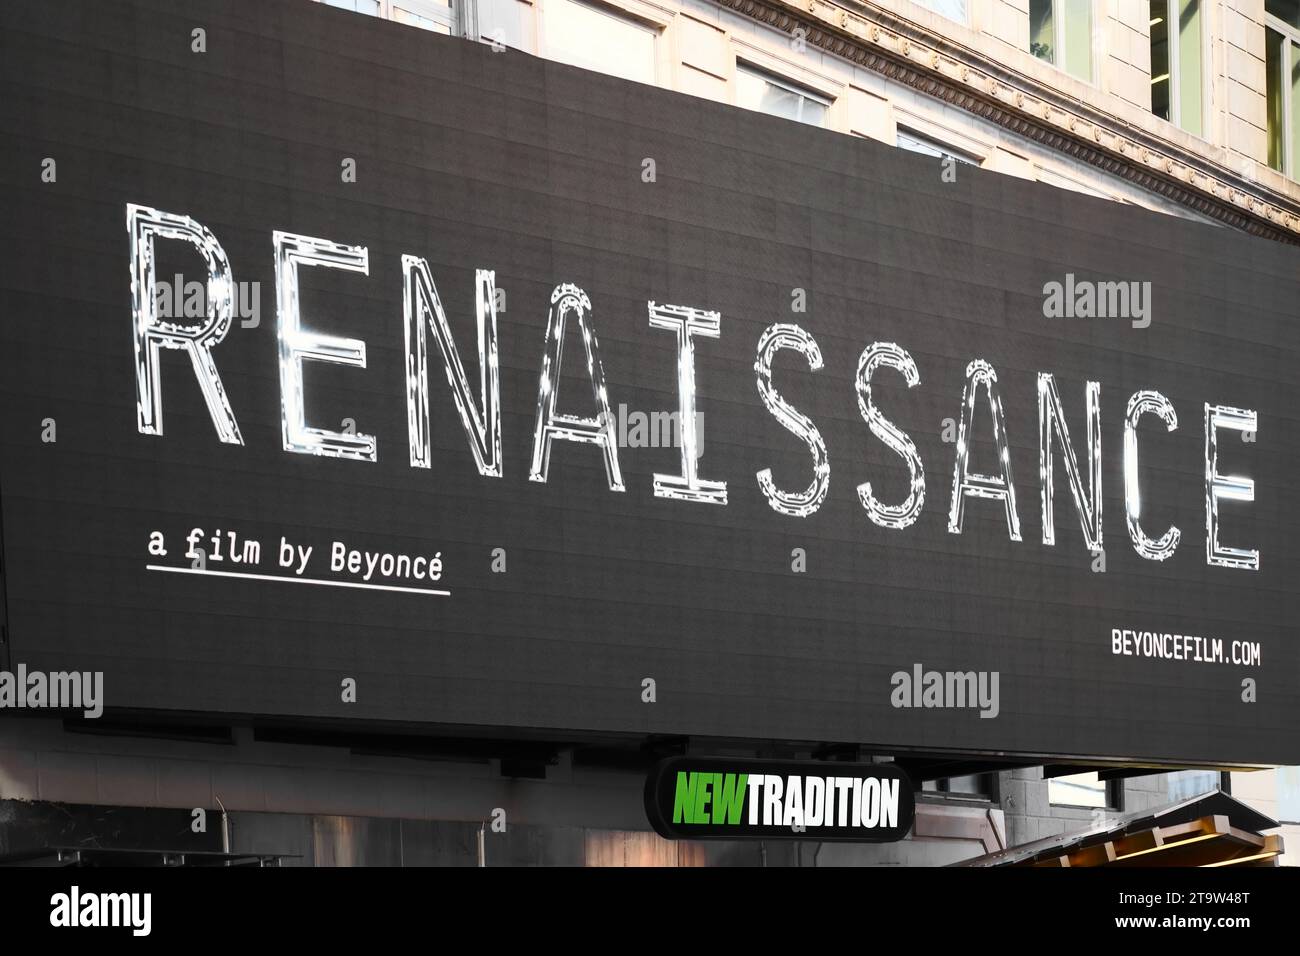 New York, NY - November 23, 2023: Renaissance a film by Beyonce promotional billboard for world tour documentary movie on theater near Times Square Stock Photo